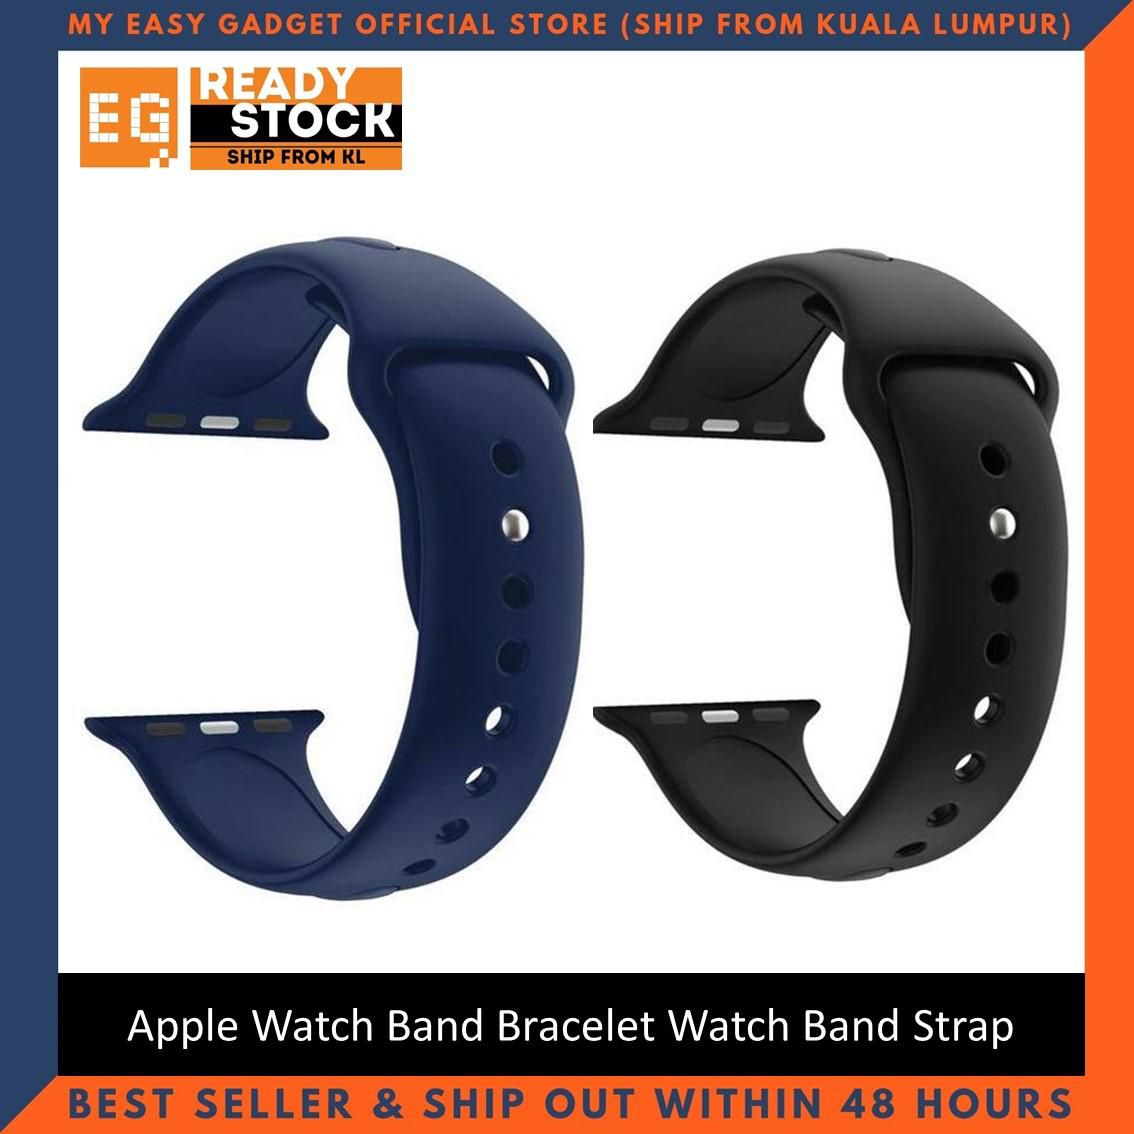 Apple Watch 5 44mm Band Bracelet Watch Band Strap For iWatch 5 Sport Band Silicone 38mm 42mm 40mm 44mm 5 4 3 2 1